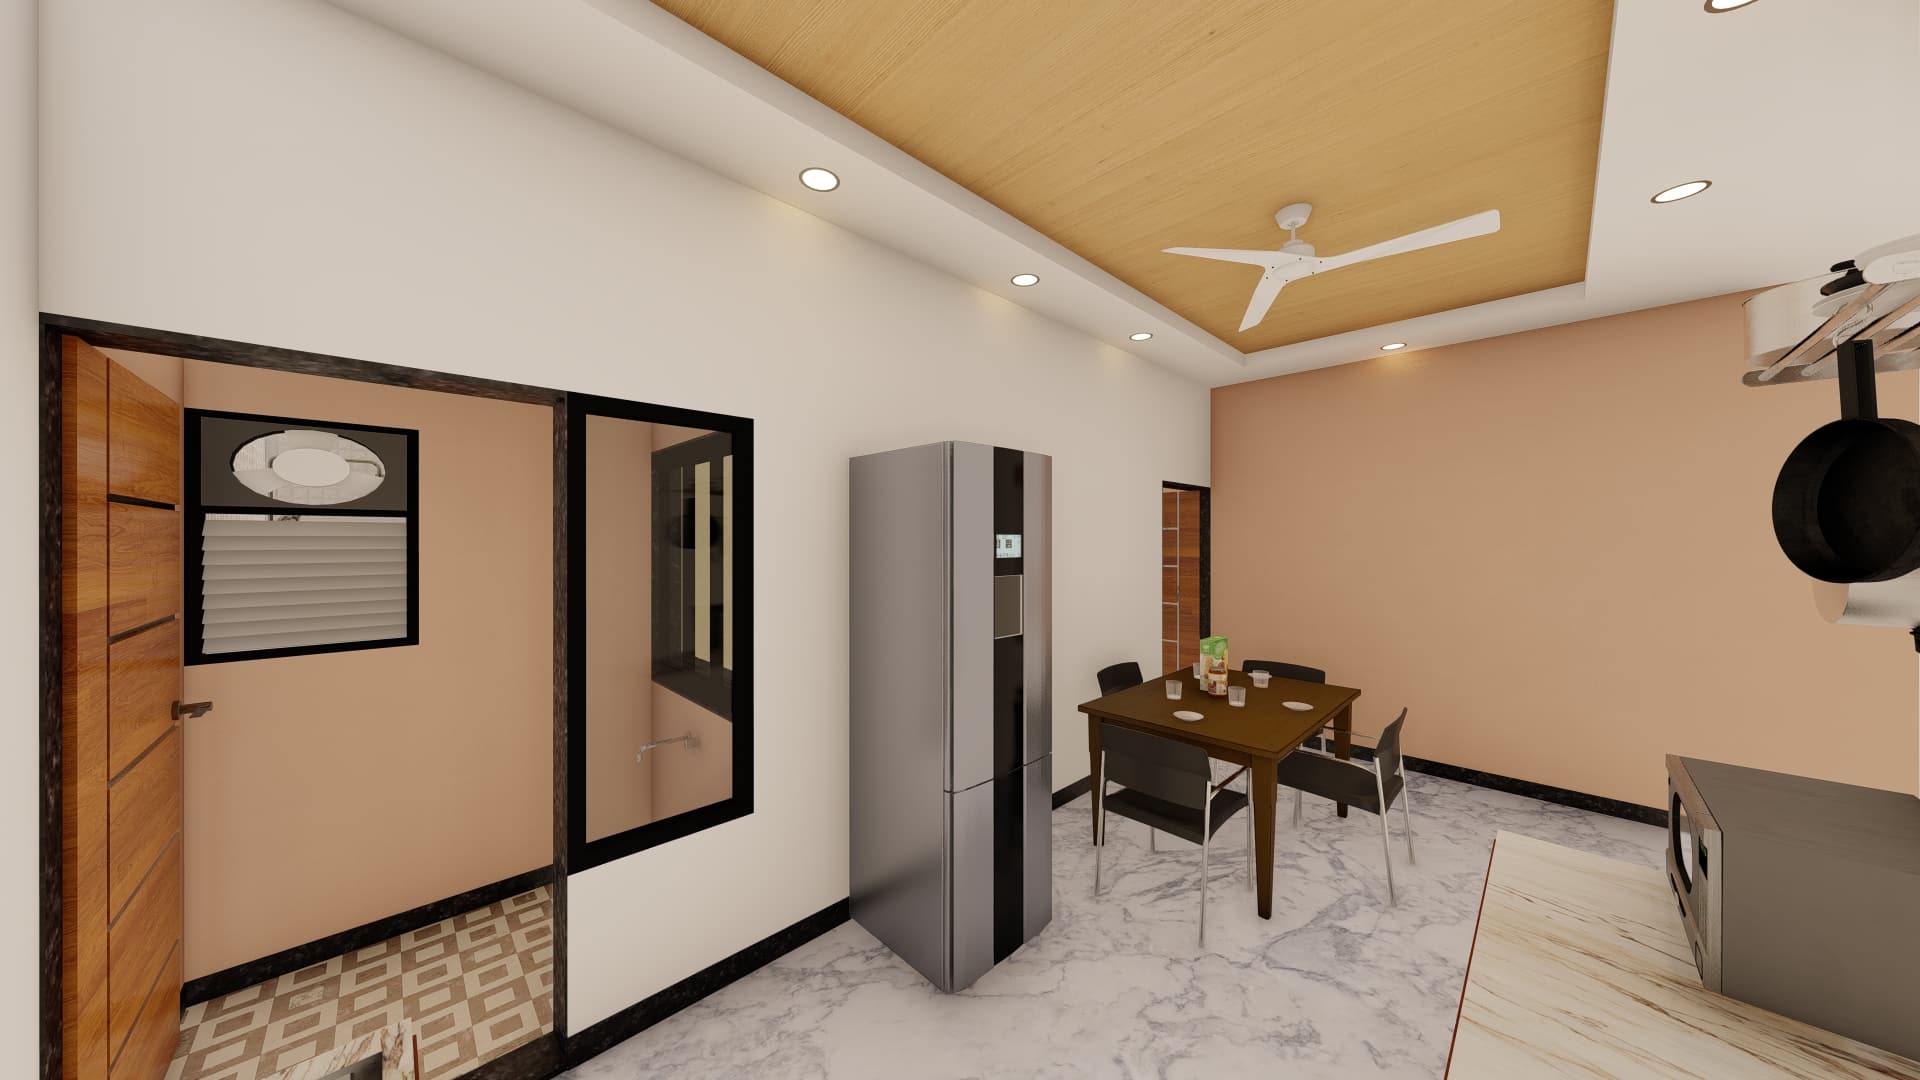 new duplex layout design large size kitchen with dining area by urban terrace north facing 1000 sq ft